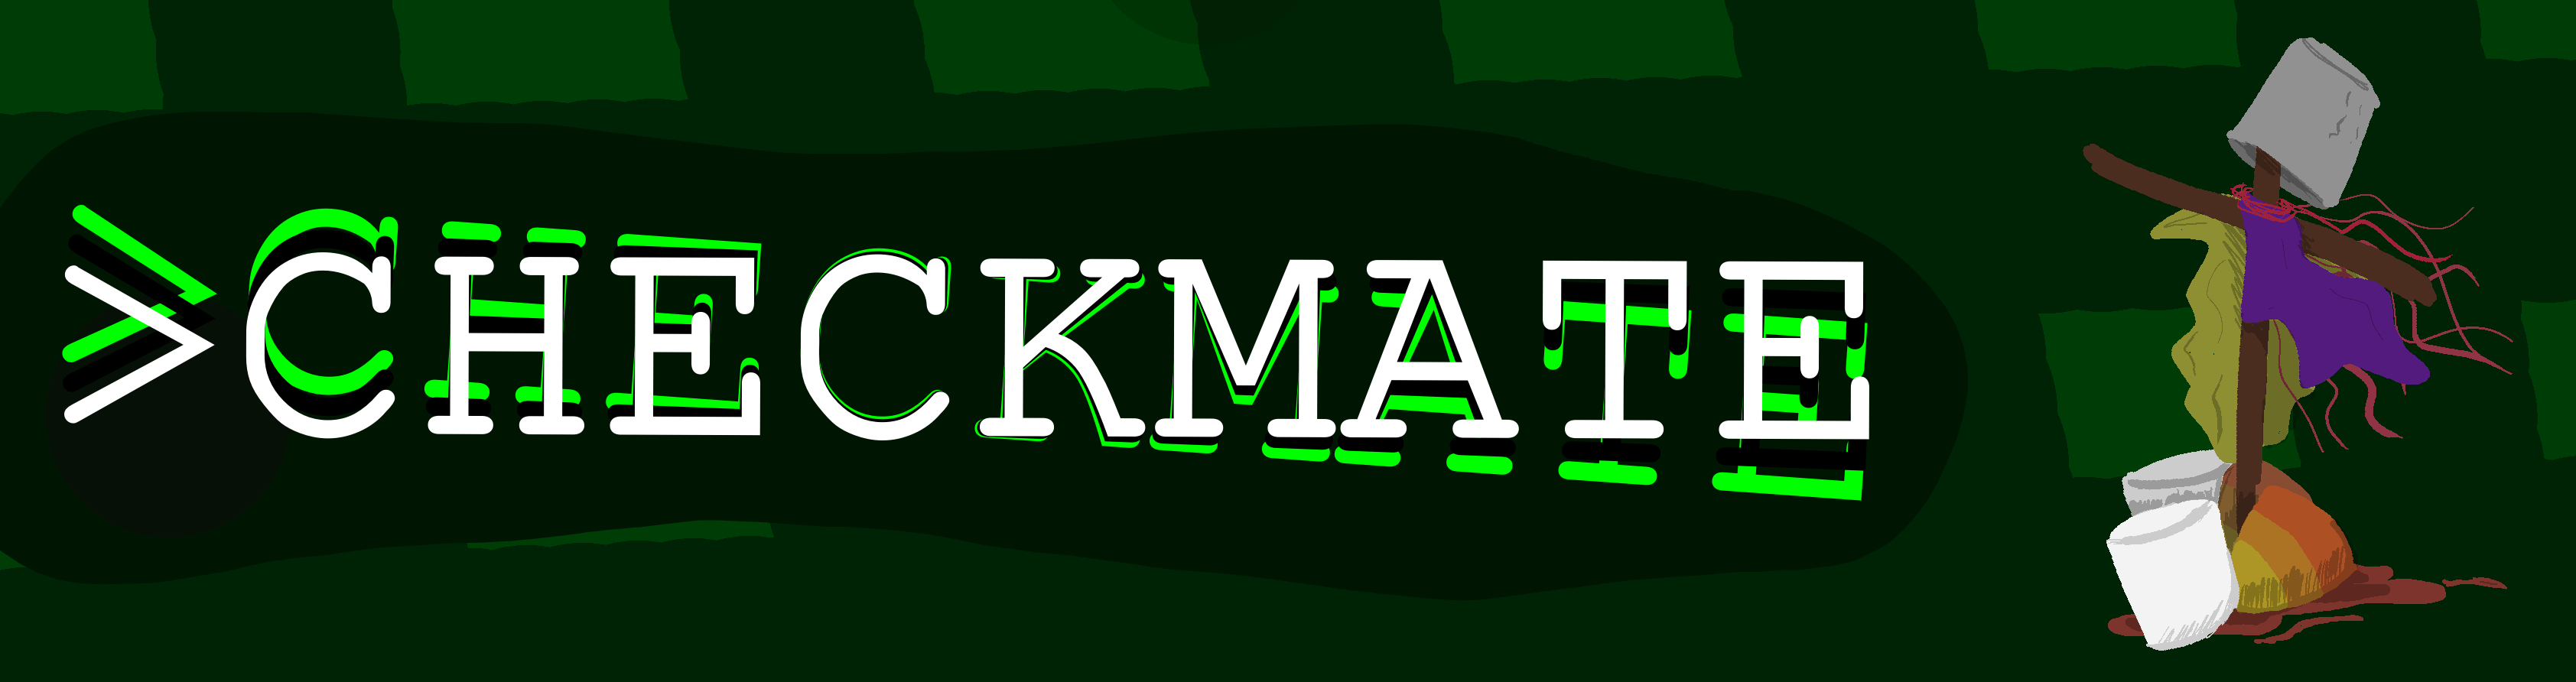 checkmate banner.png